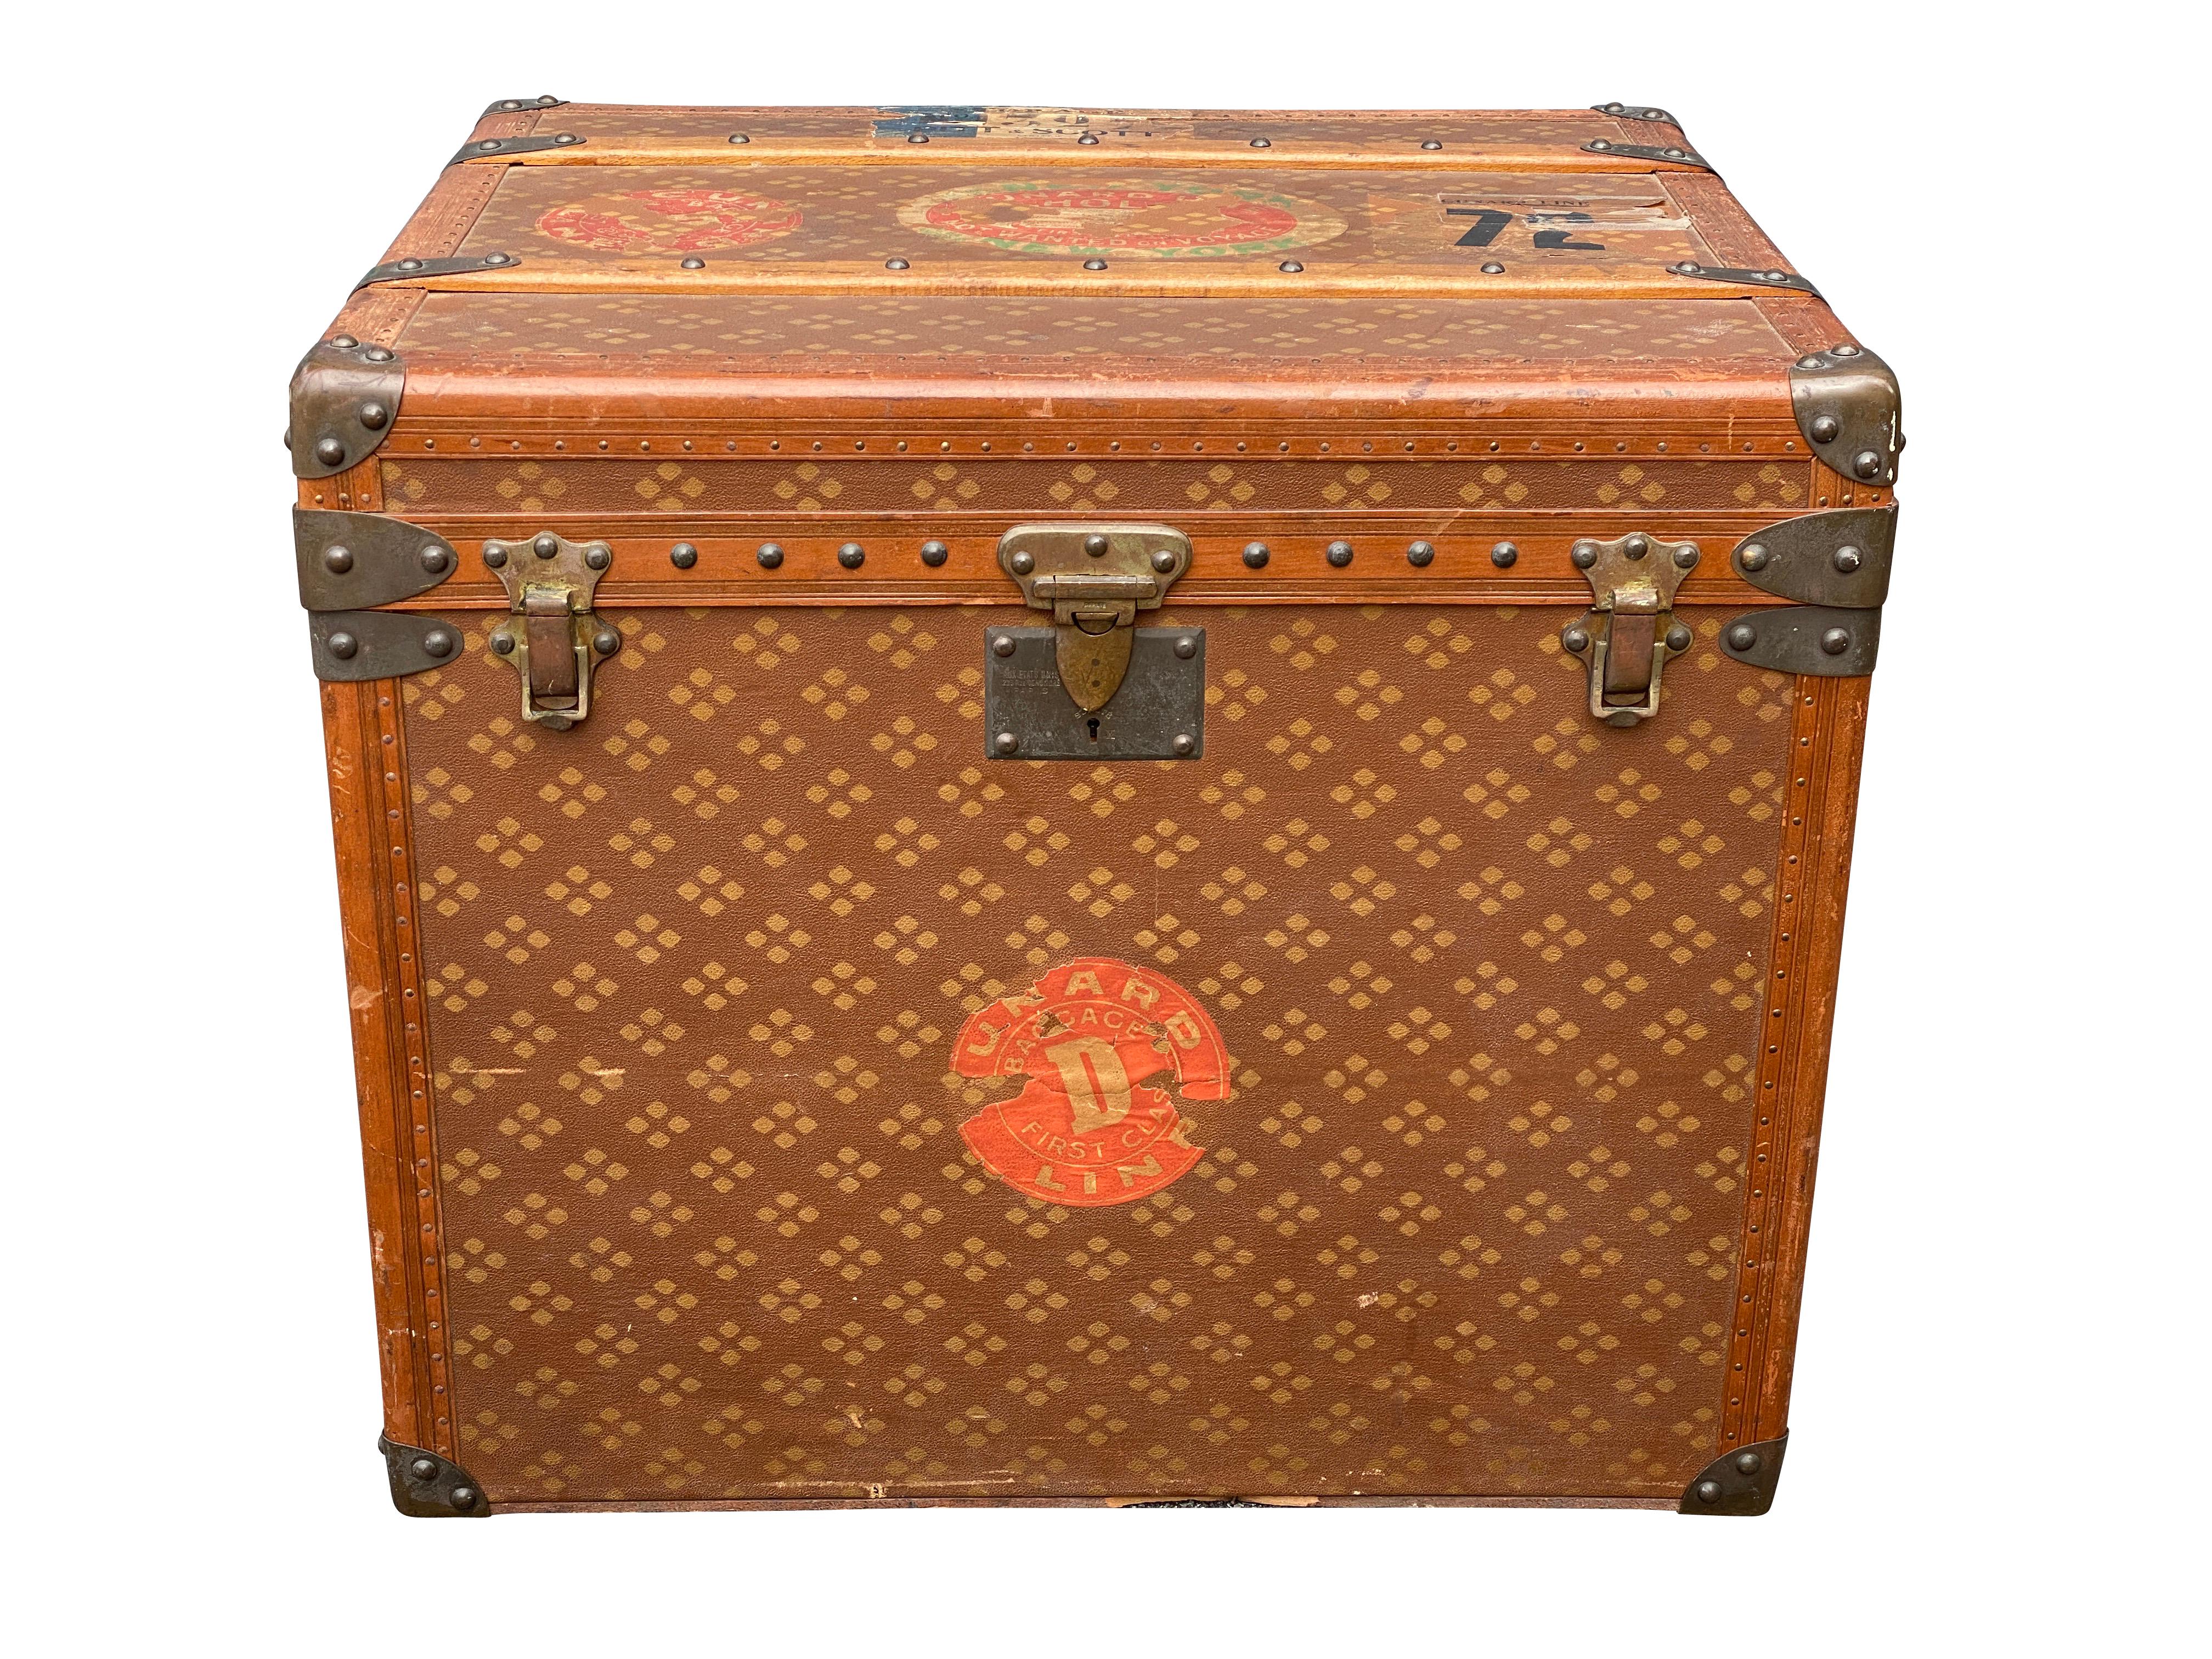 Finest quality with stickers from the Aquitania, Hotel Meurice etc. In excellent condition. A Parisian trunk maker established 1845 two doors down from Goyard on rue St Honore. Customers include the Duke of Windsor, Vanderbilts, Duke of Westminster